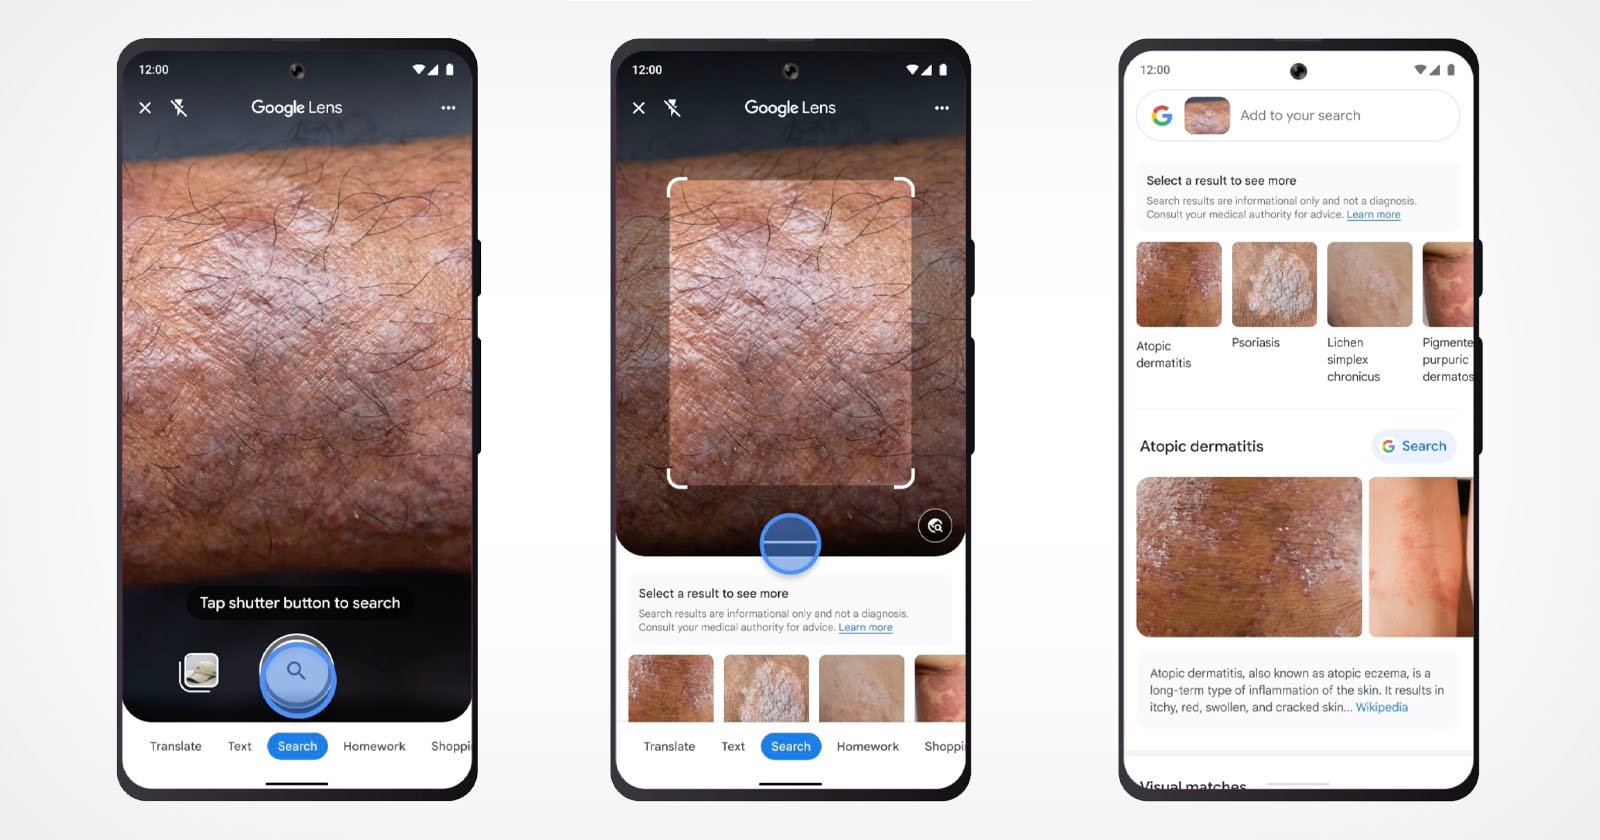 Google Lens Can Now Search Skin Conditions With Just a Photo